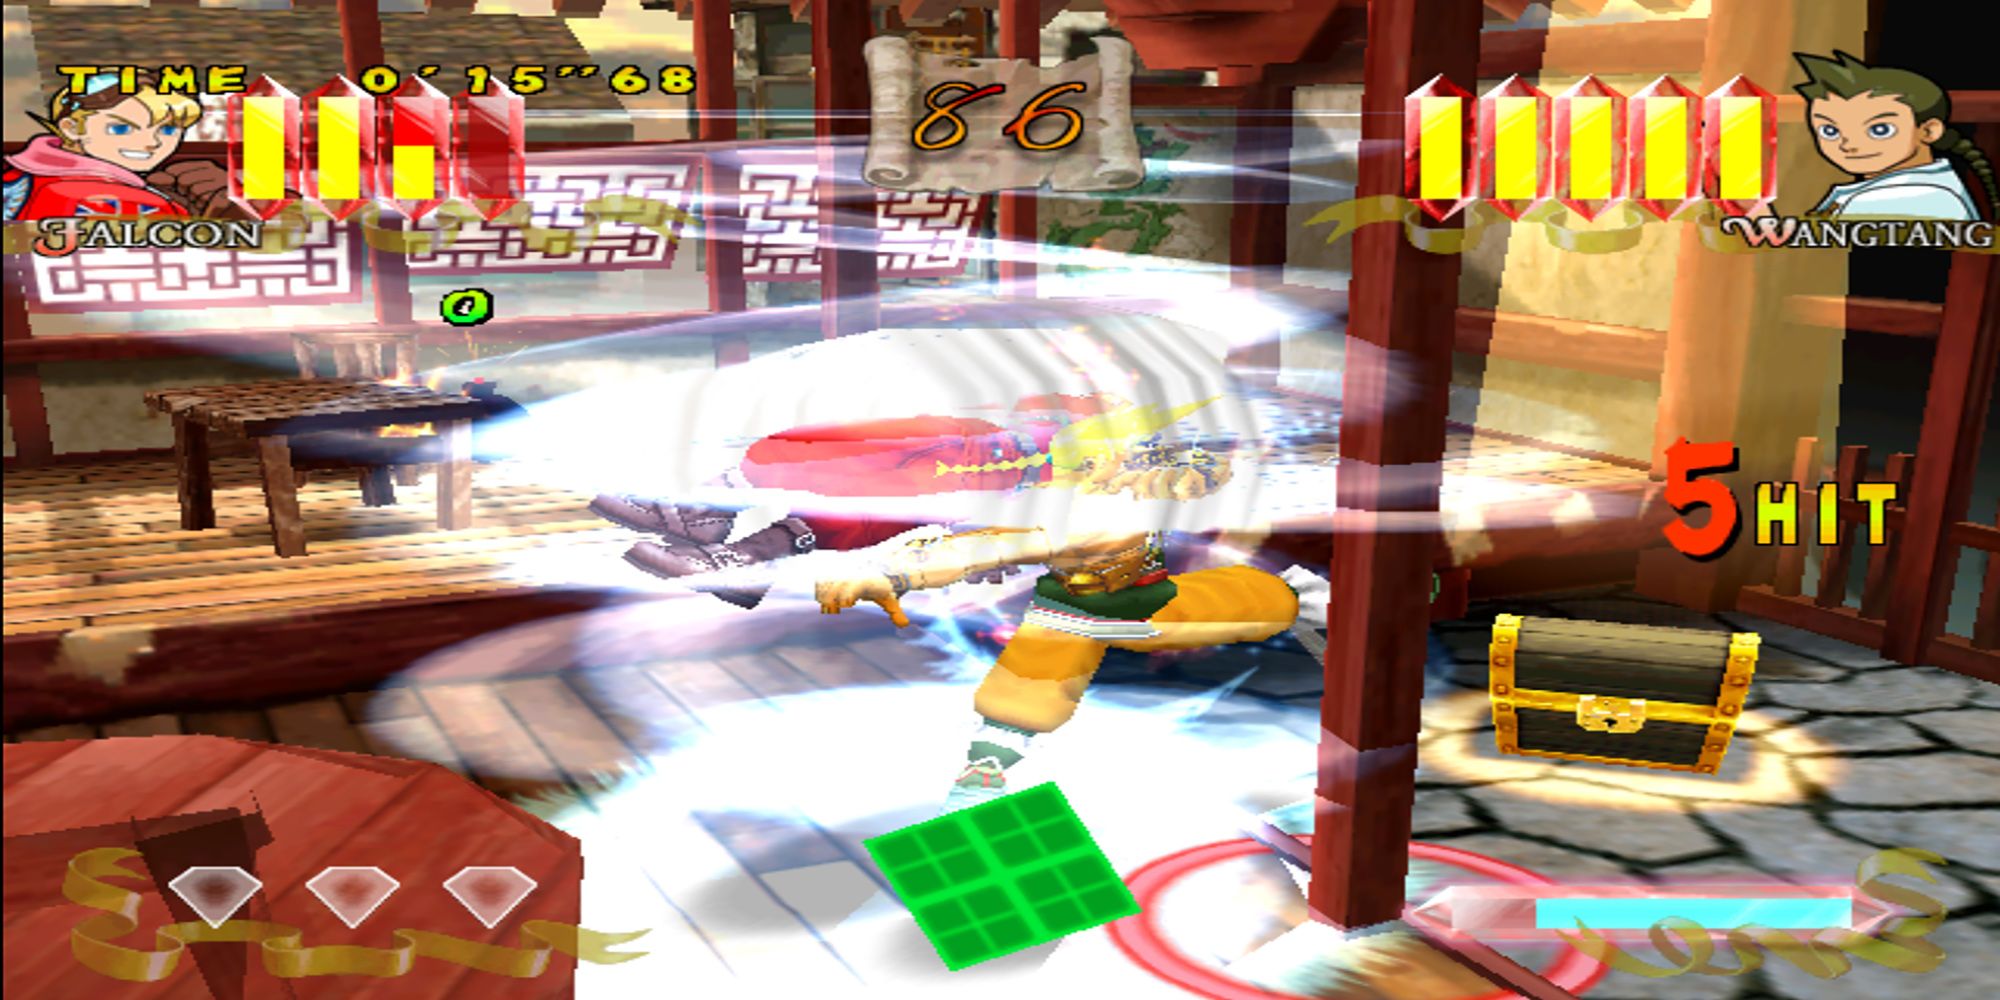 Wangtang spins Falcon in a powerful cyclone during a restaurant brawl in Power Stone.